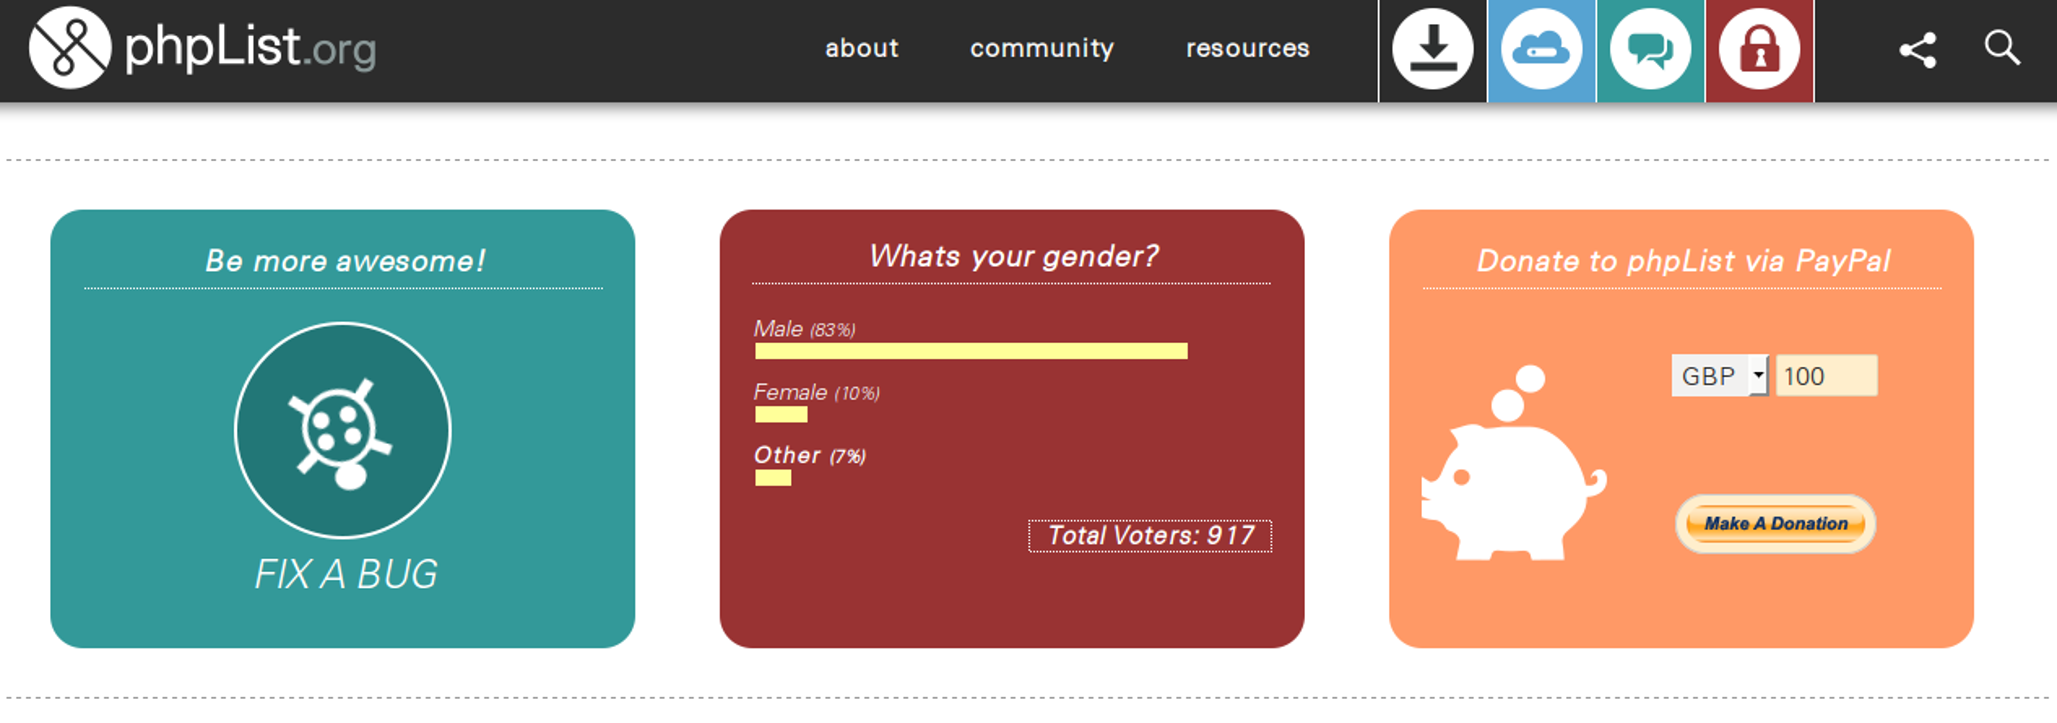 A screenshot of a PHP List survey on the gender of their users.